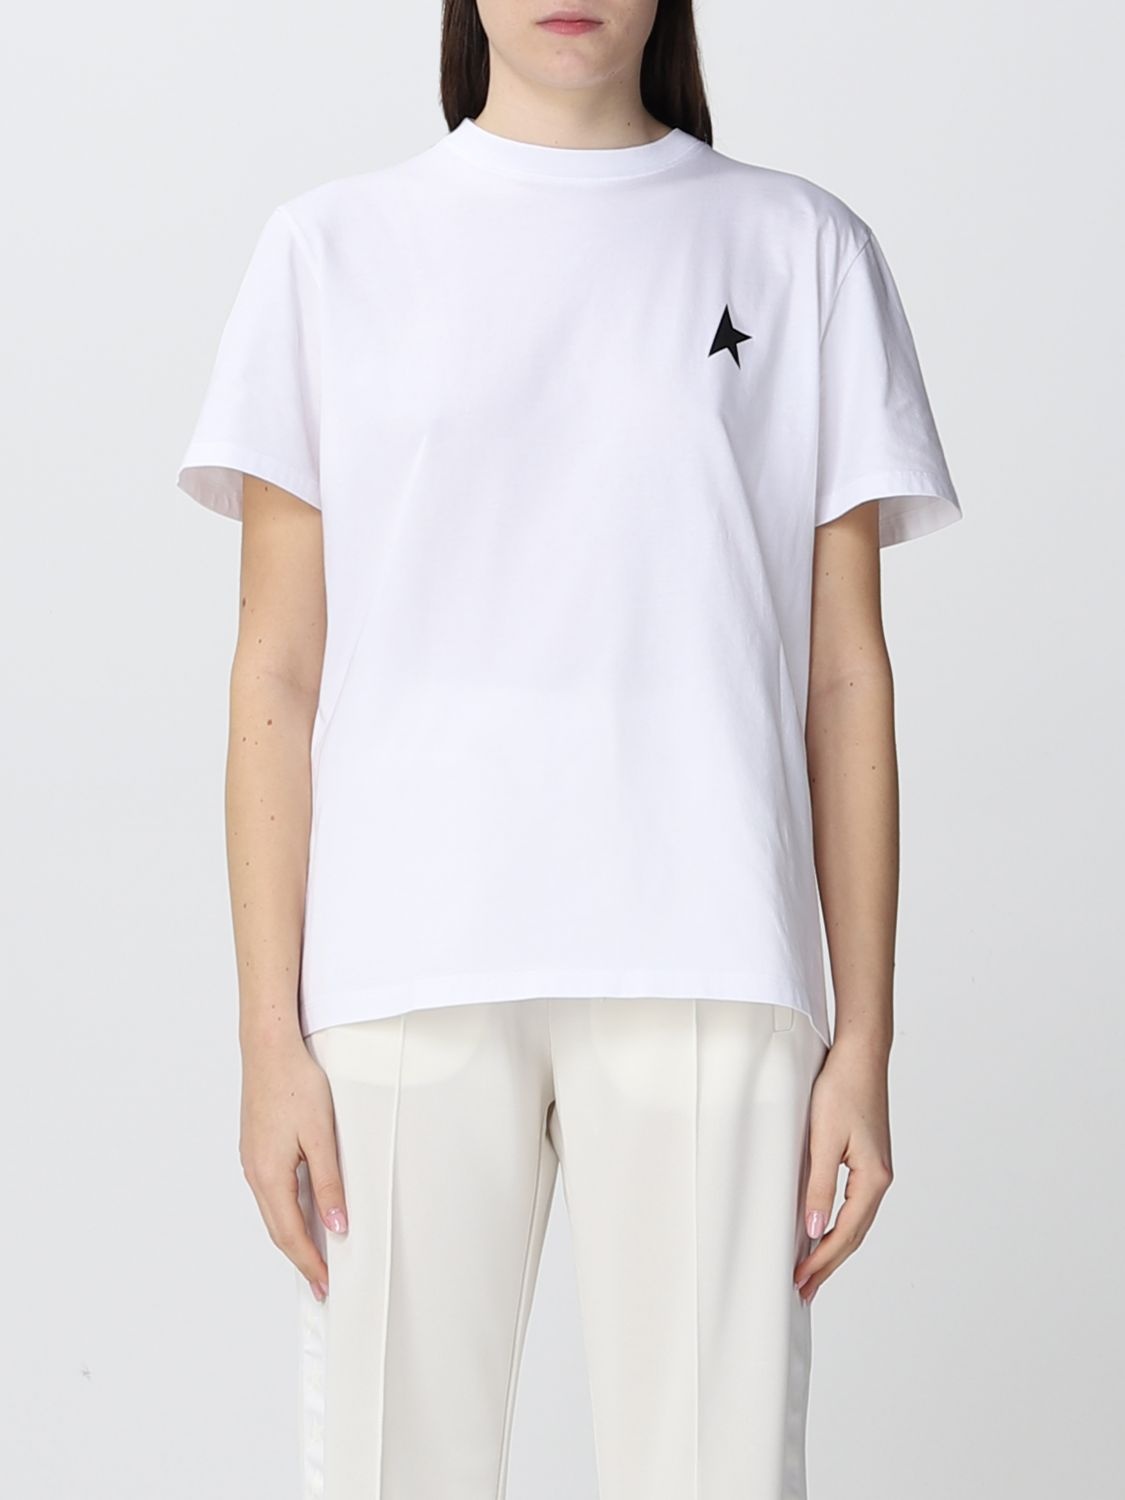 Golden Goose T-shirt in jersey with Star logo - 1